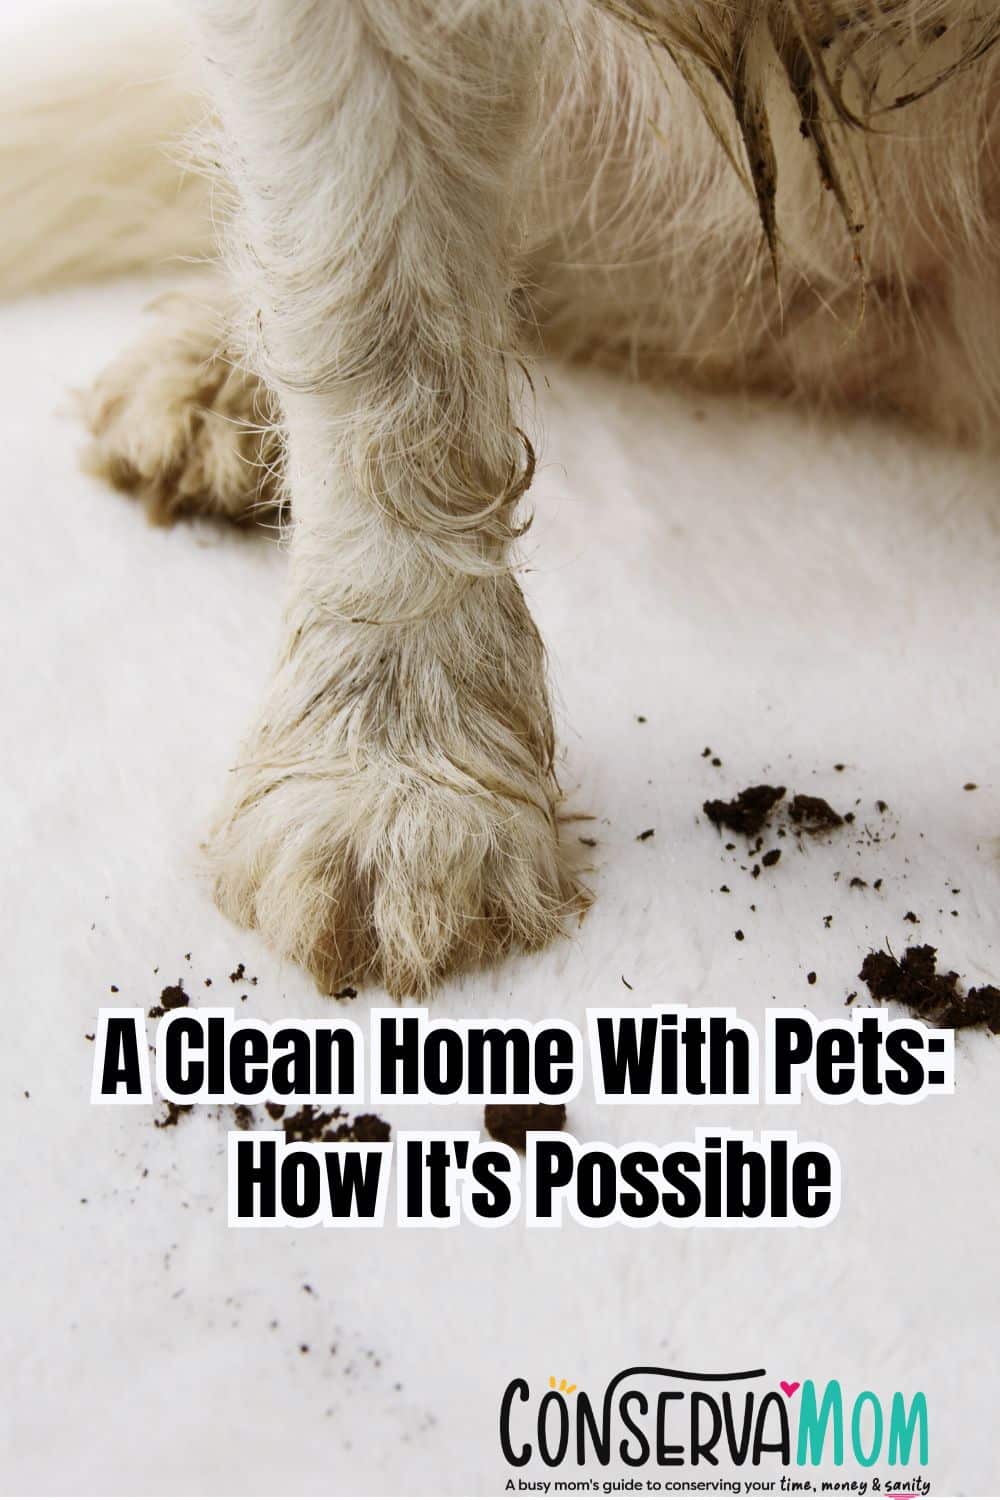 A Clean Home With Pets: How It's Possible